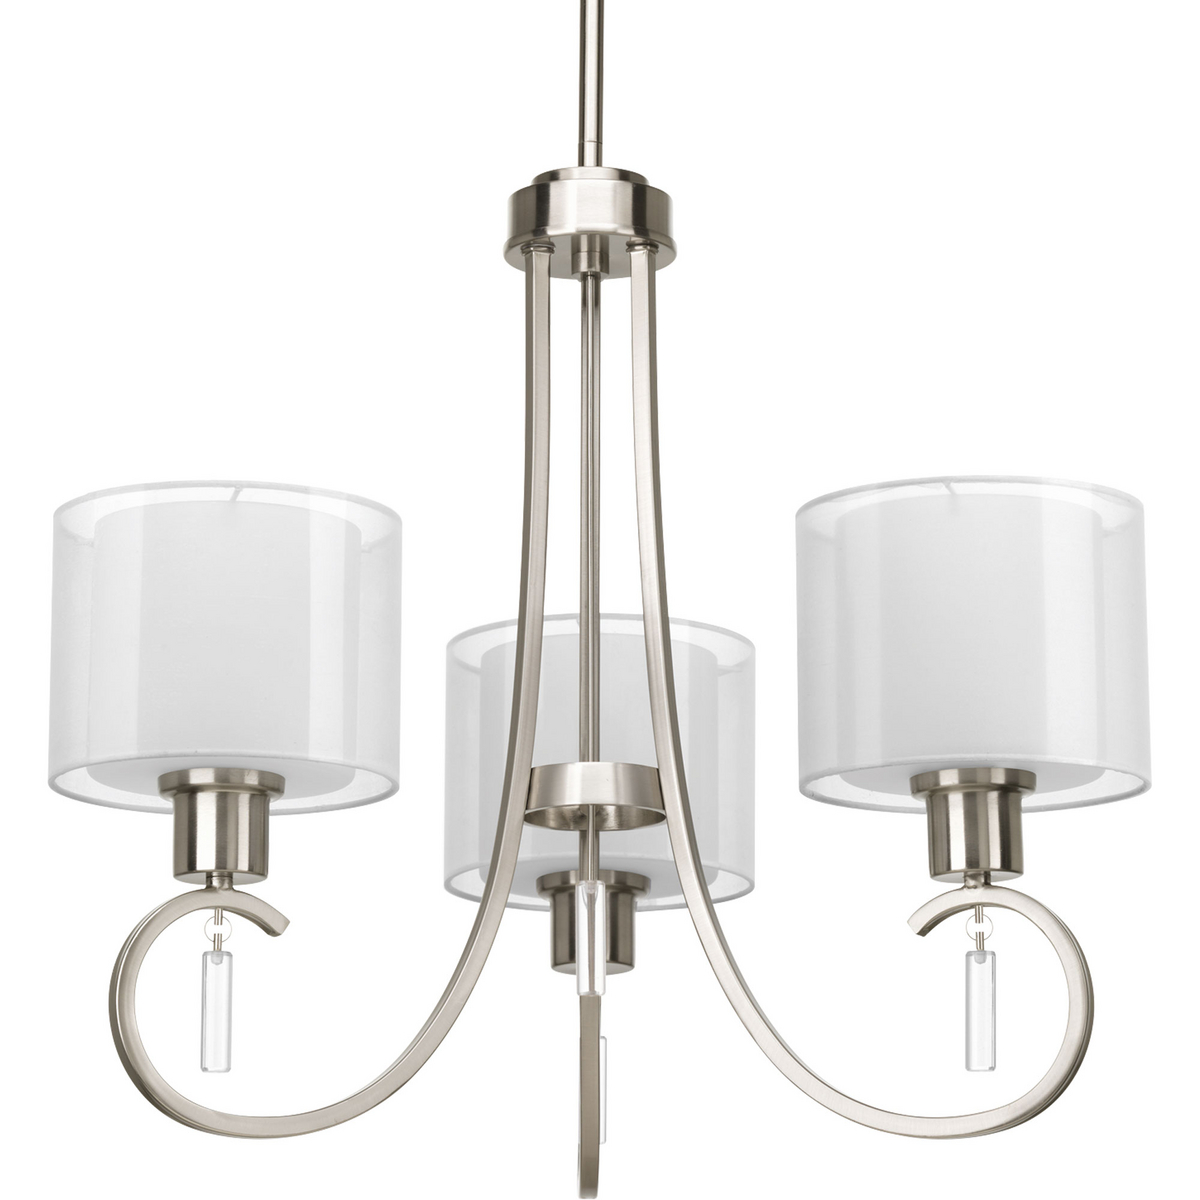 Invite the beauty of light into your home with this Brushed Nickel three-light chandelier. Invite provides a welcoming silhouette with a unique shade comprised of an inner glass globe encircled by a translucent sheer Mylar shade. The rich, layering effect creates a dreamy look that is both elegant and modern. Offered as a complete collection, the Invite styling can be carried throughout your home or as a focal style in a special room.